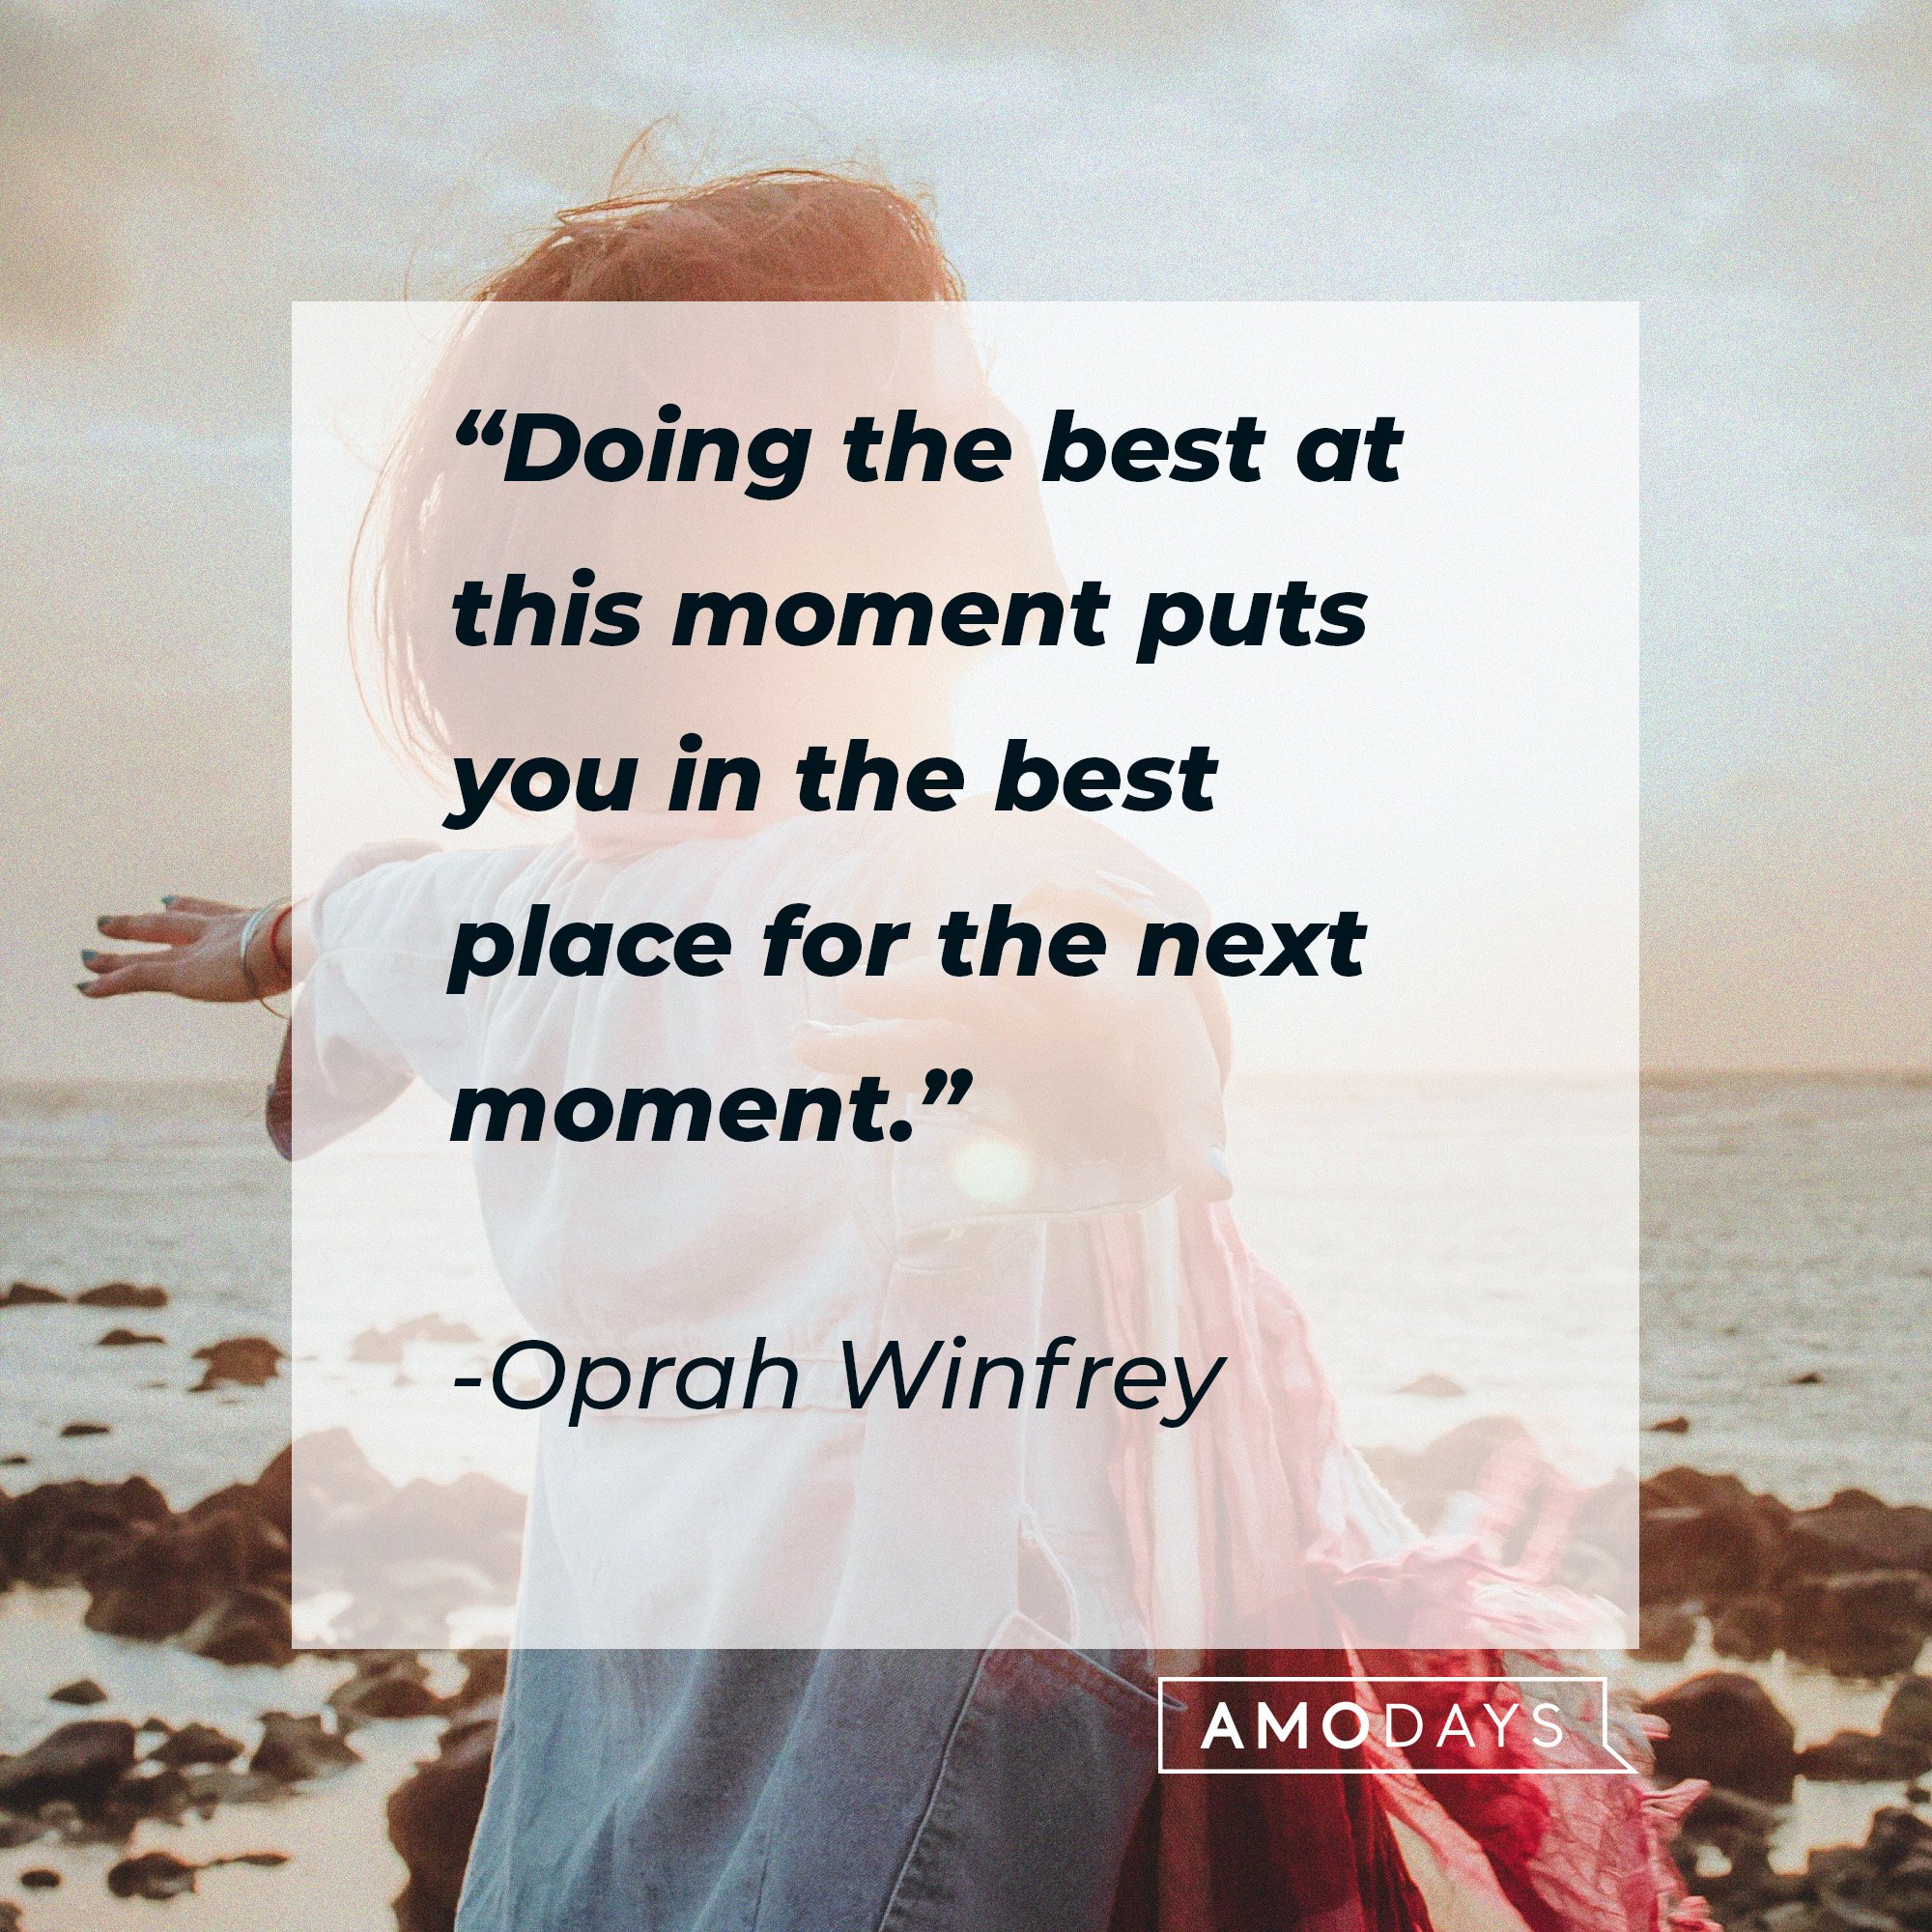 Oprah Winfrey's quote: “Doing the best at this moment puts you in the best place for the next moment.” | Image: AmoDays